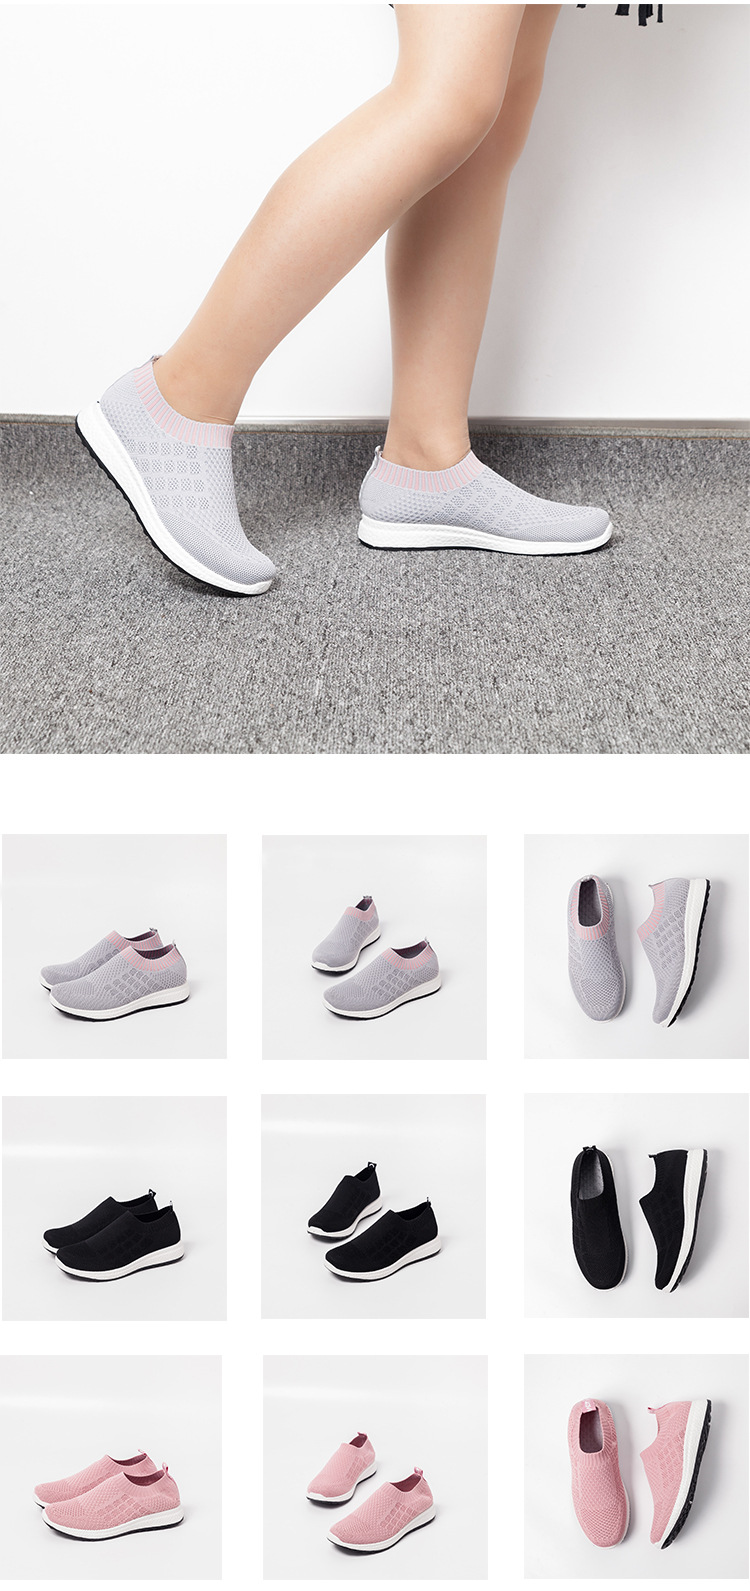 Lazy Shoes Stretch Casual Socks Shoes Women Flying Knit Sports Shoes